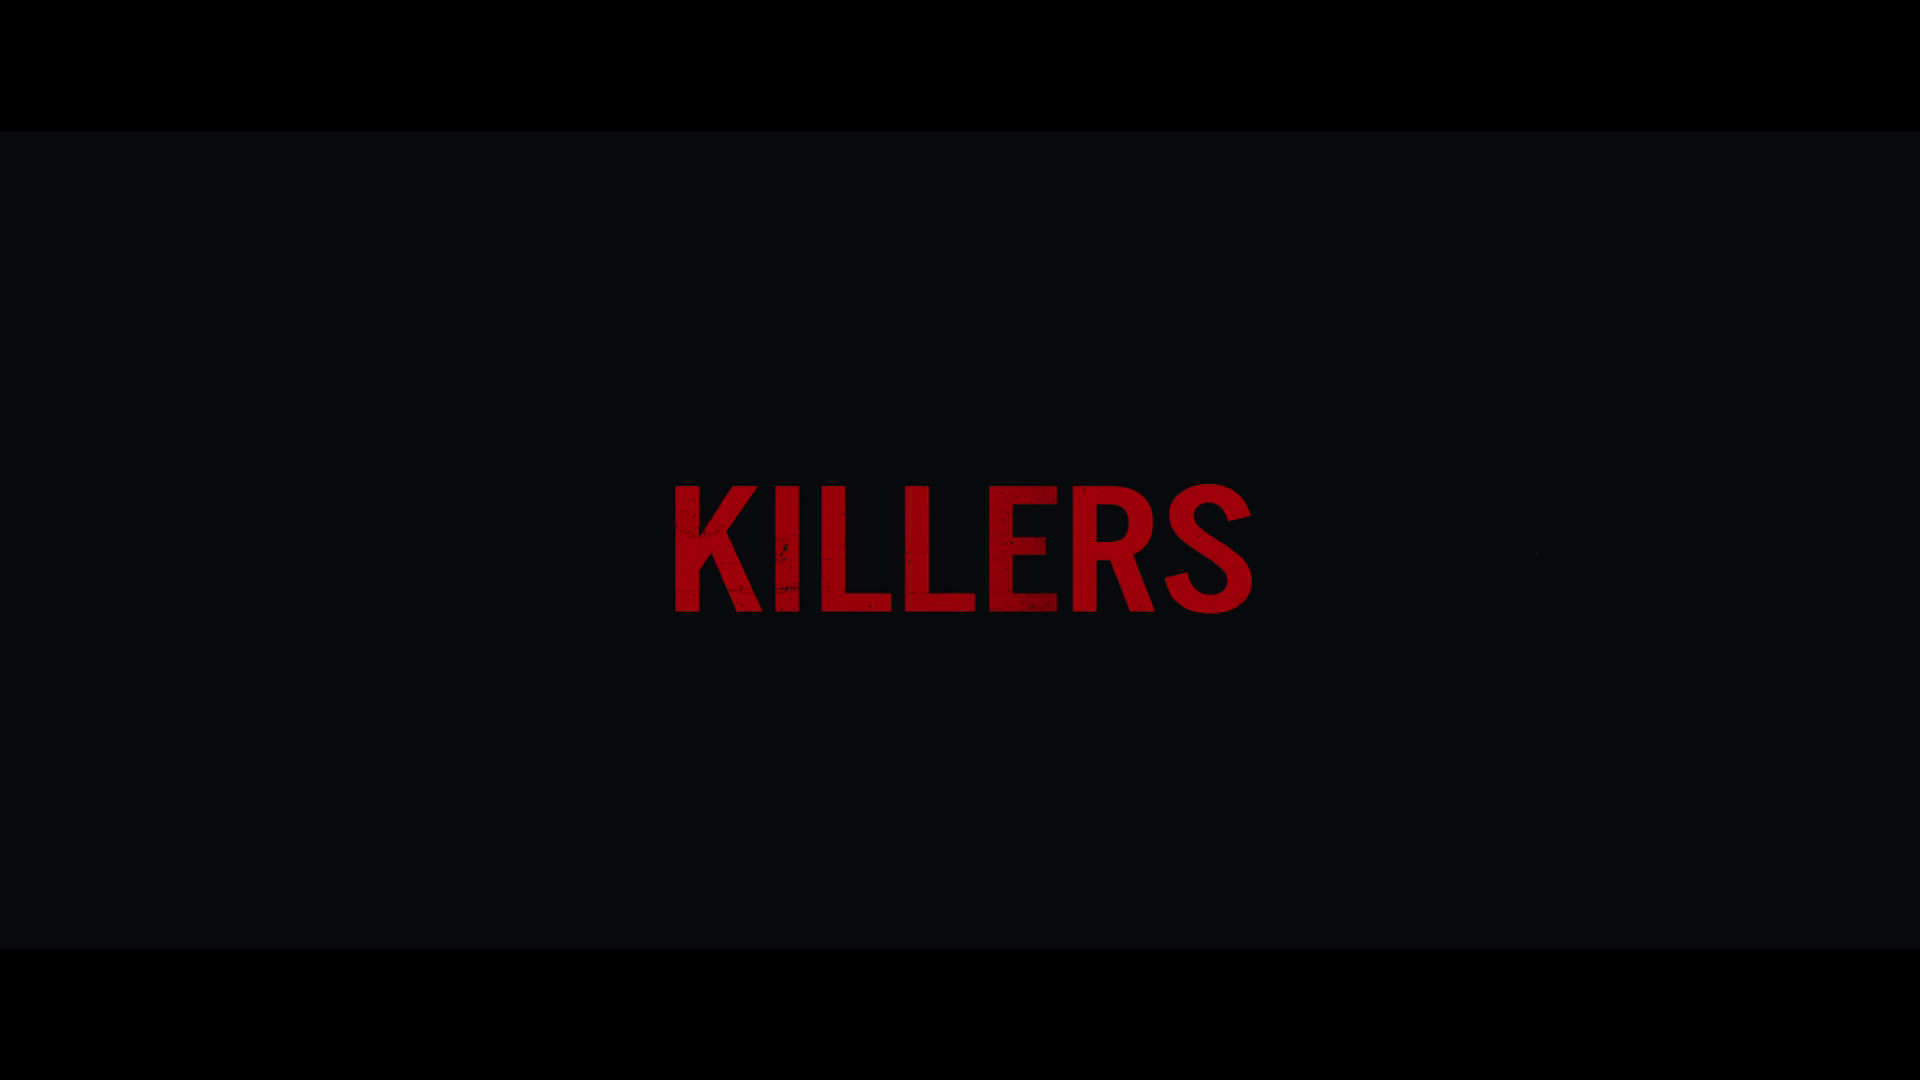 Killers (2014) (Blu-ray) : DVD Talk Review of the Blu-ray